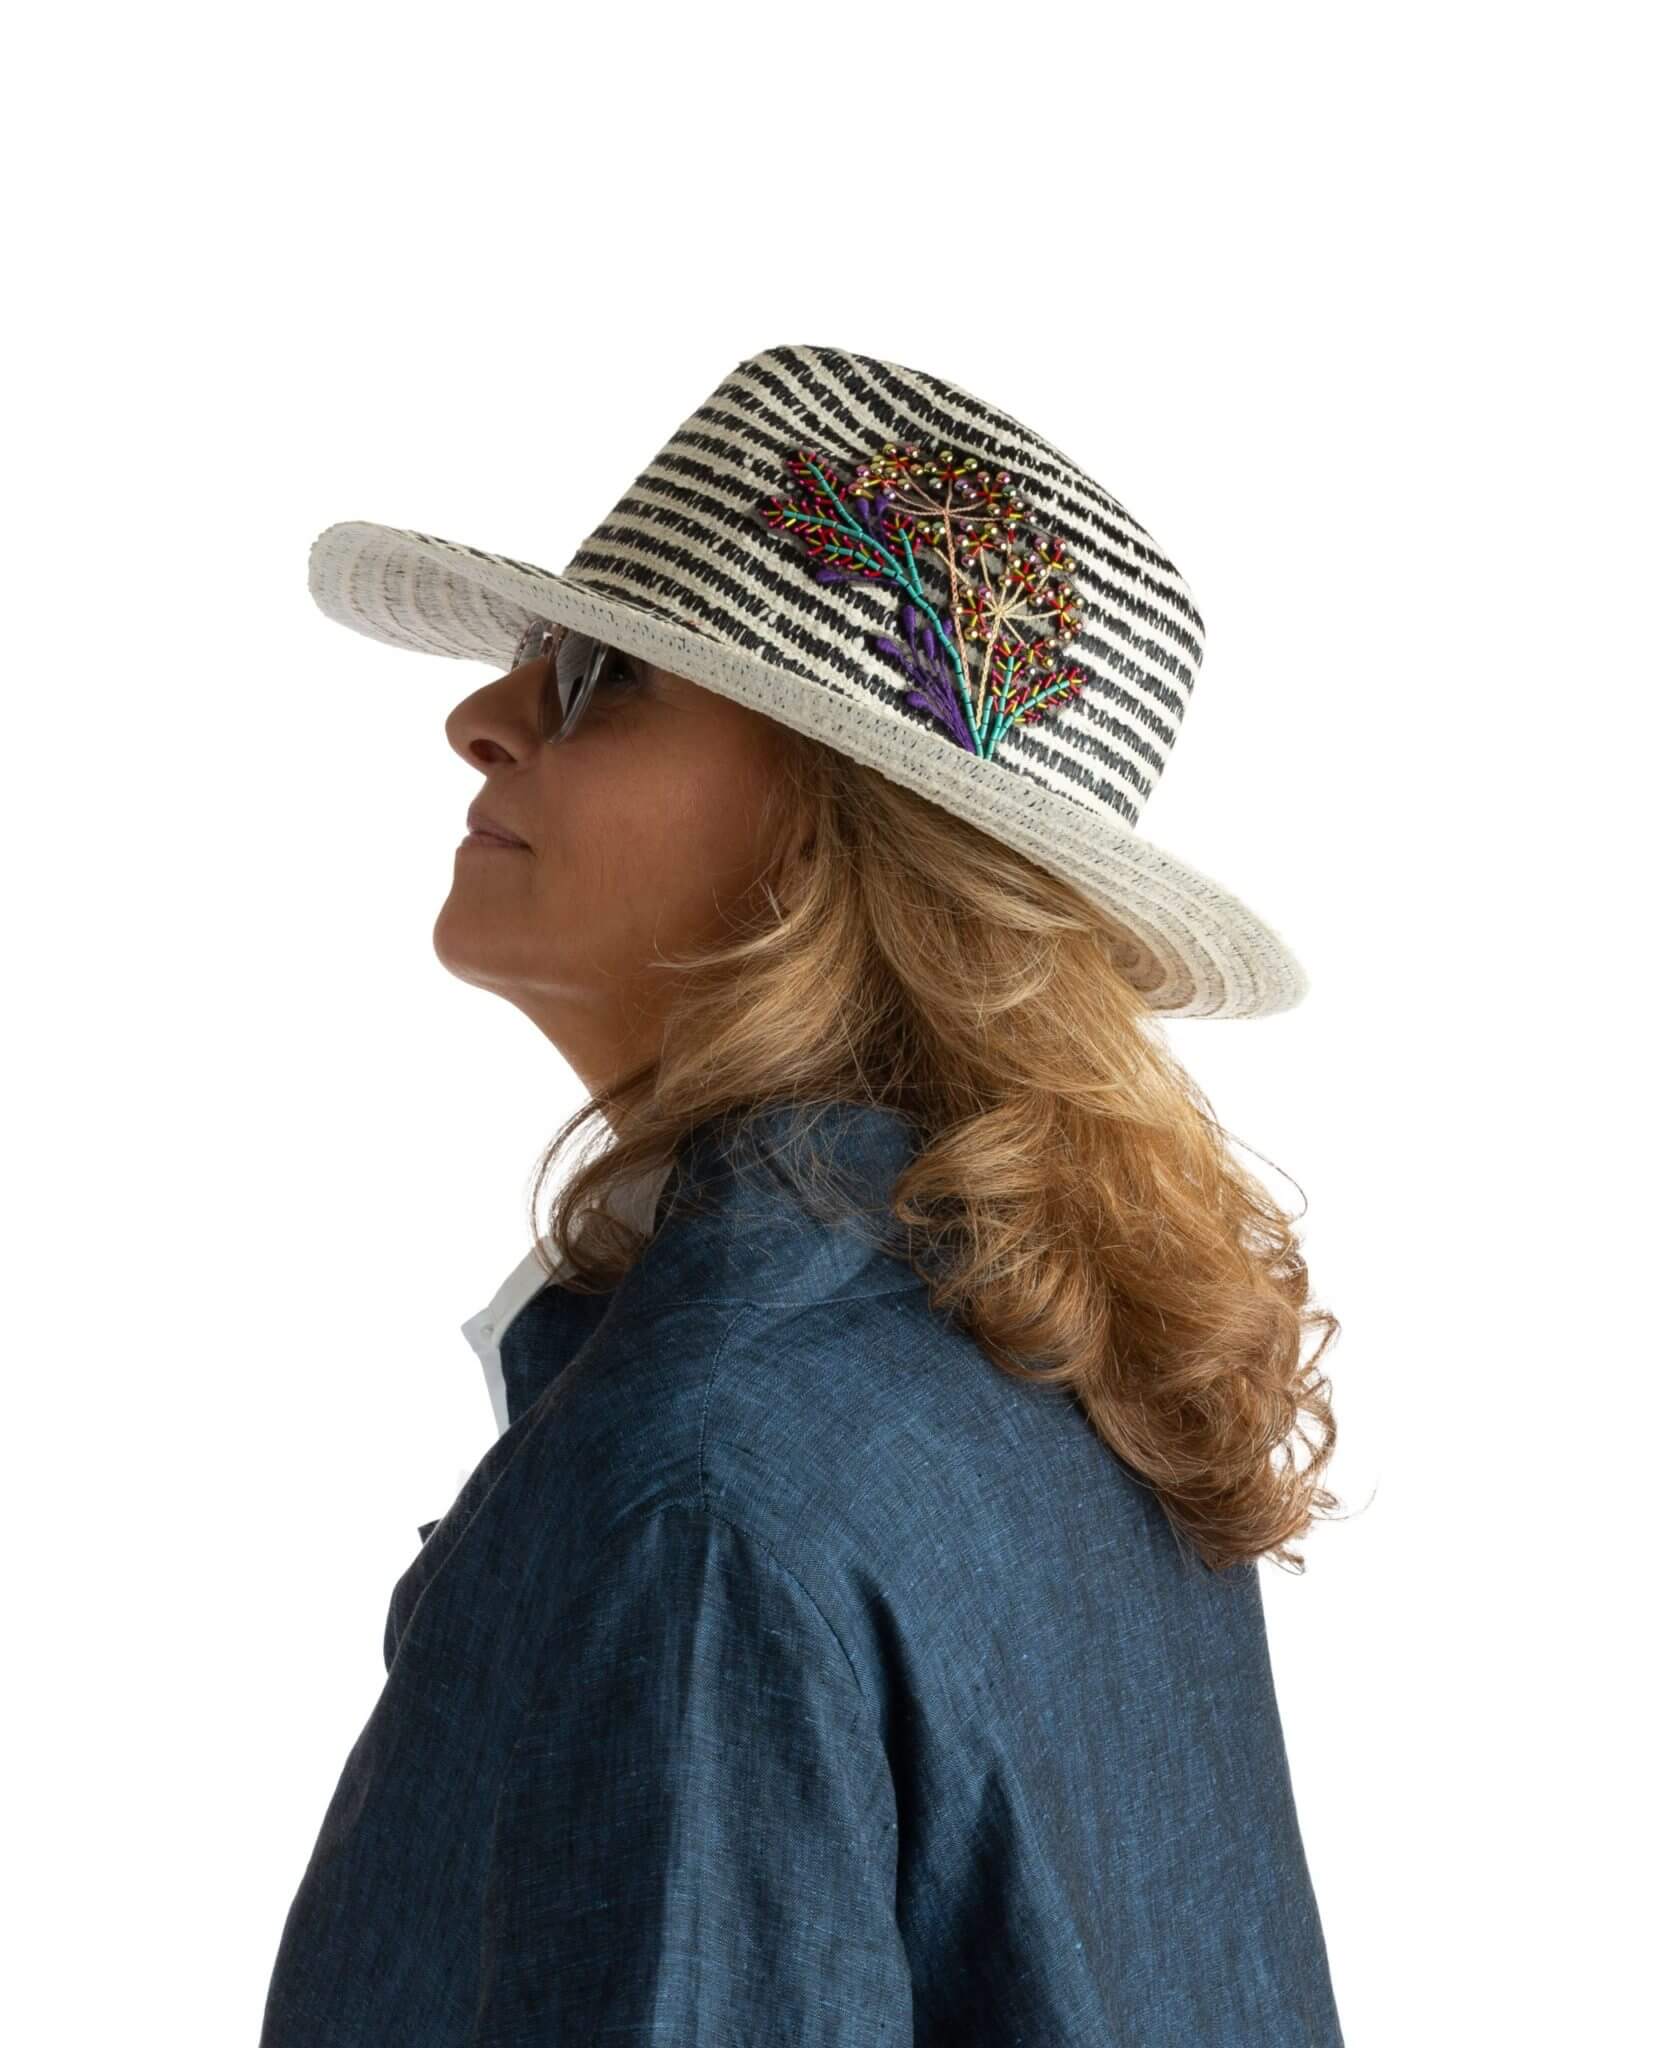 Why hats are necessary for your wardrobe?